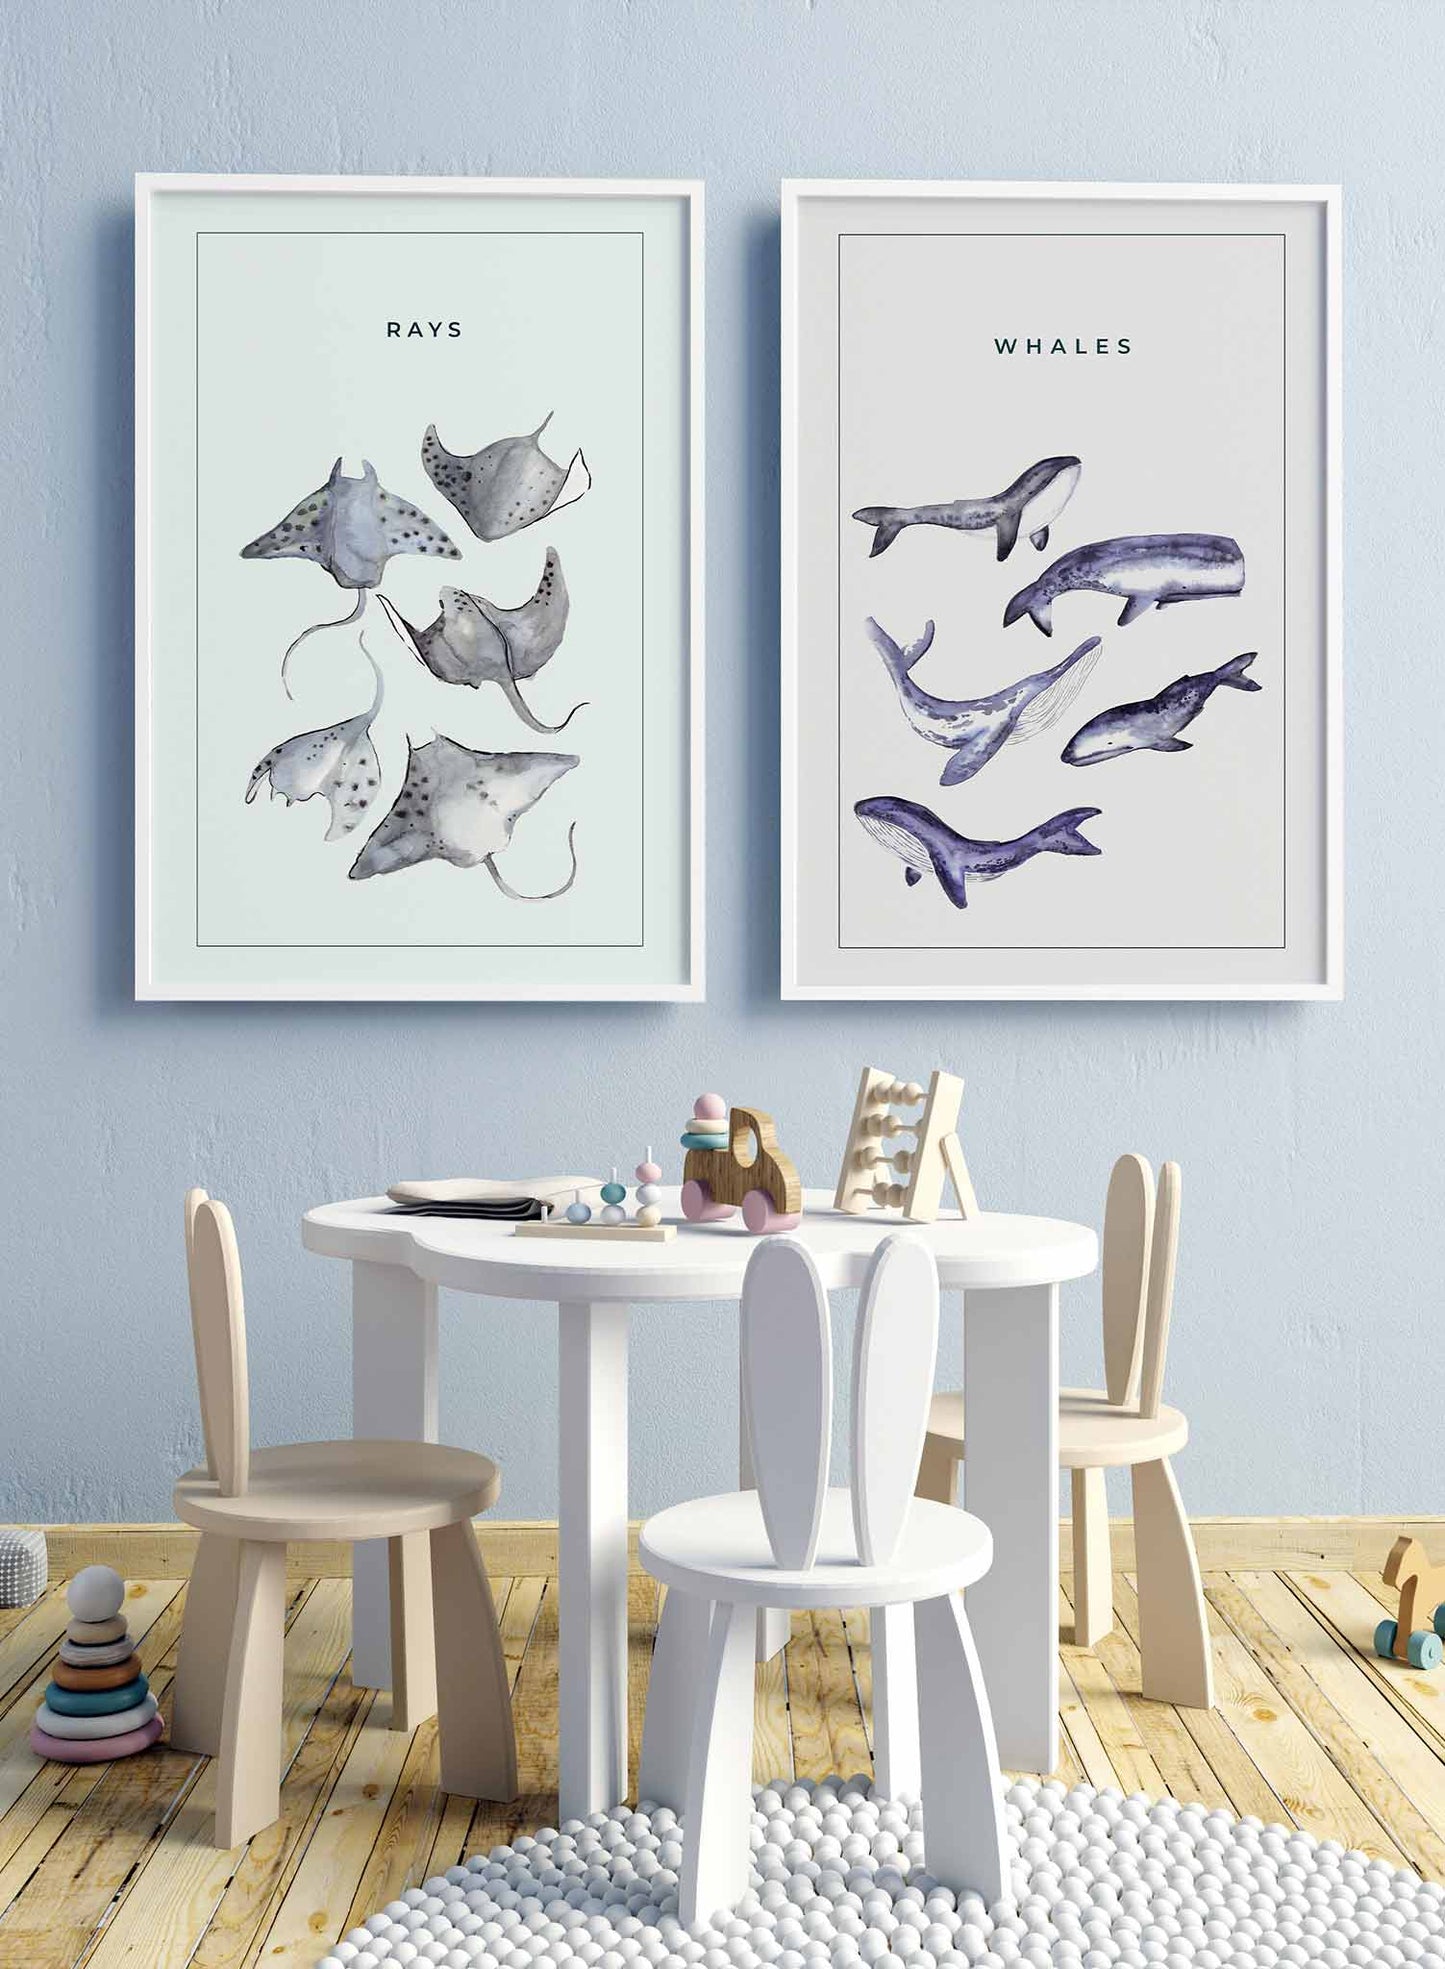 Whale Gang' is a minimalist illustration by Opposite Wall of five types of whales drawn in grey-blue colours over a light aqua blue background.